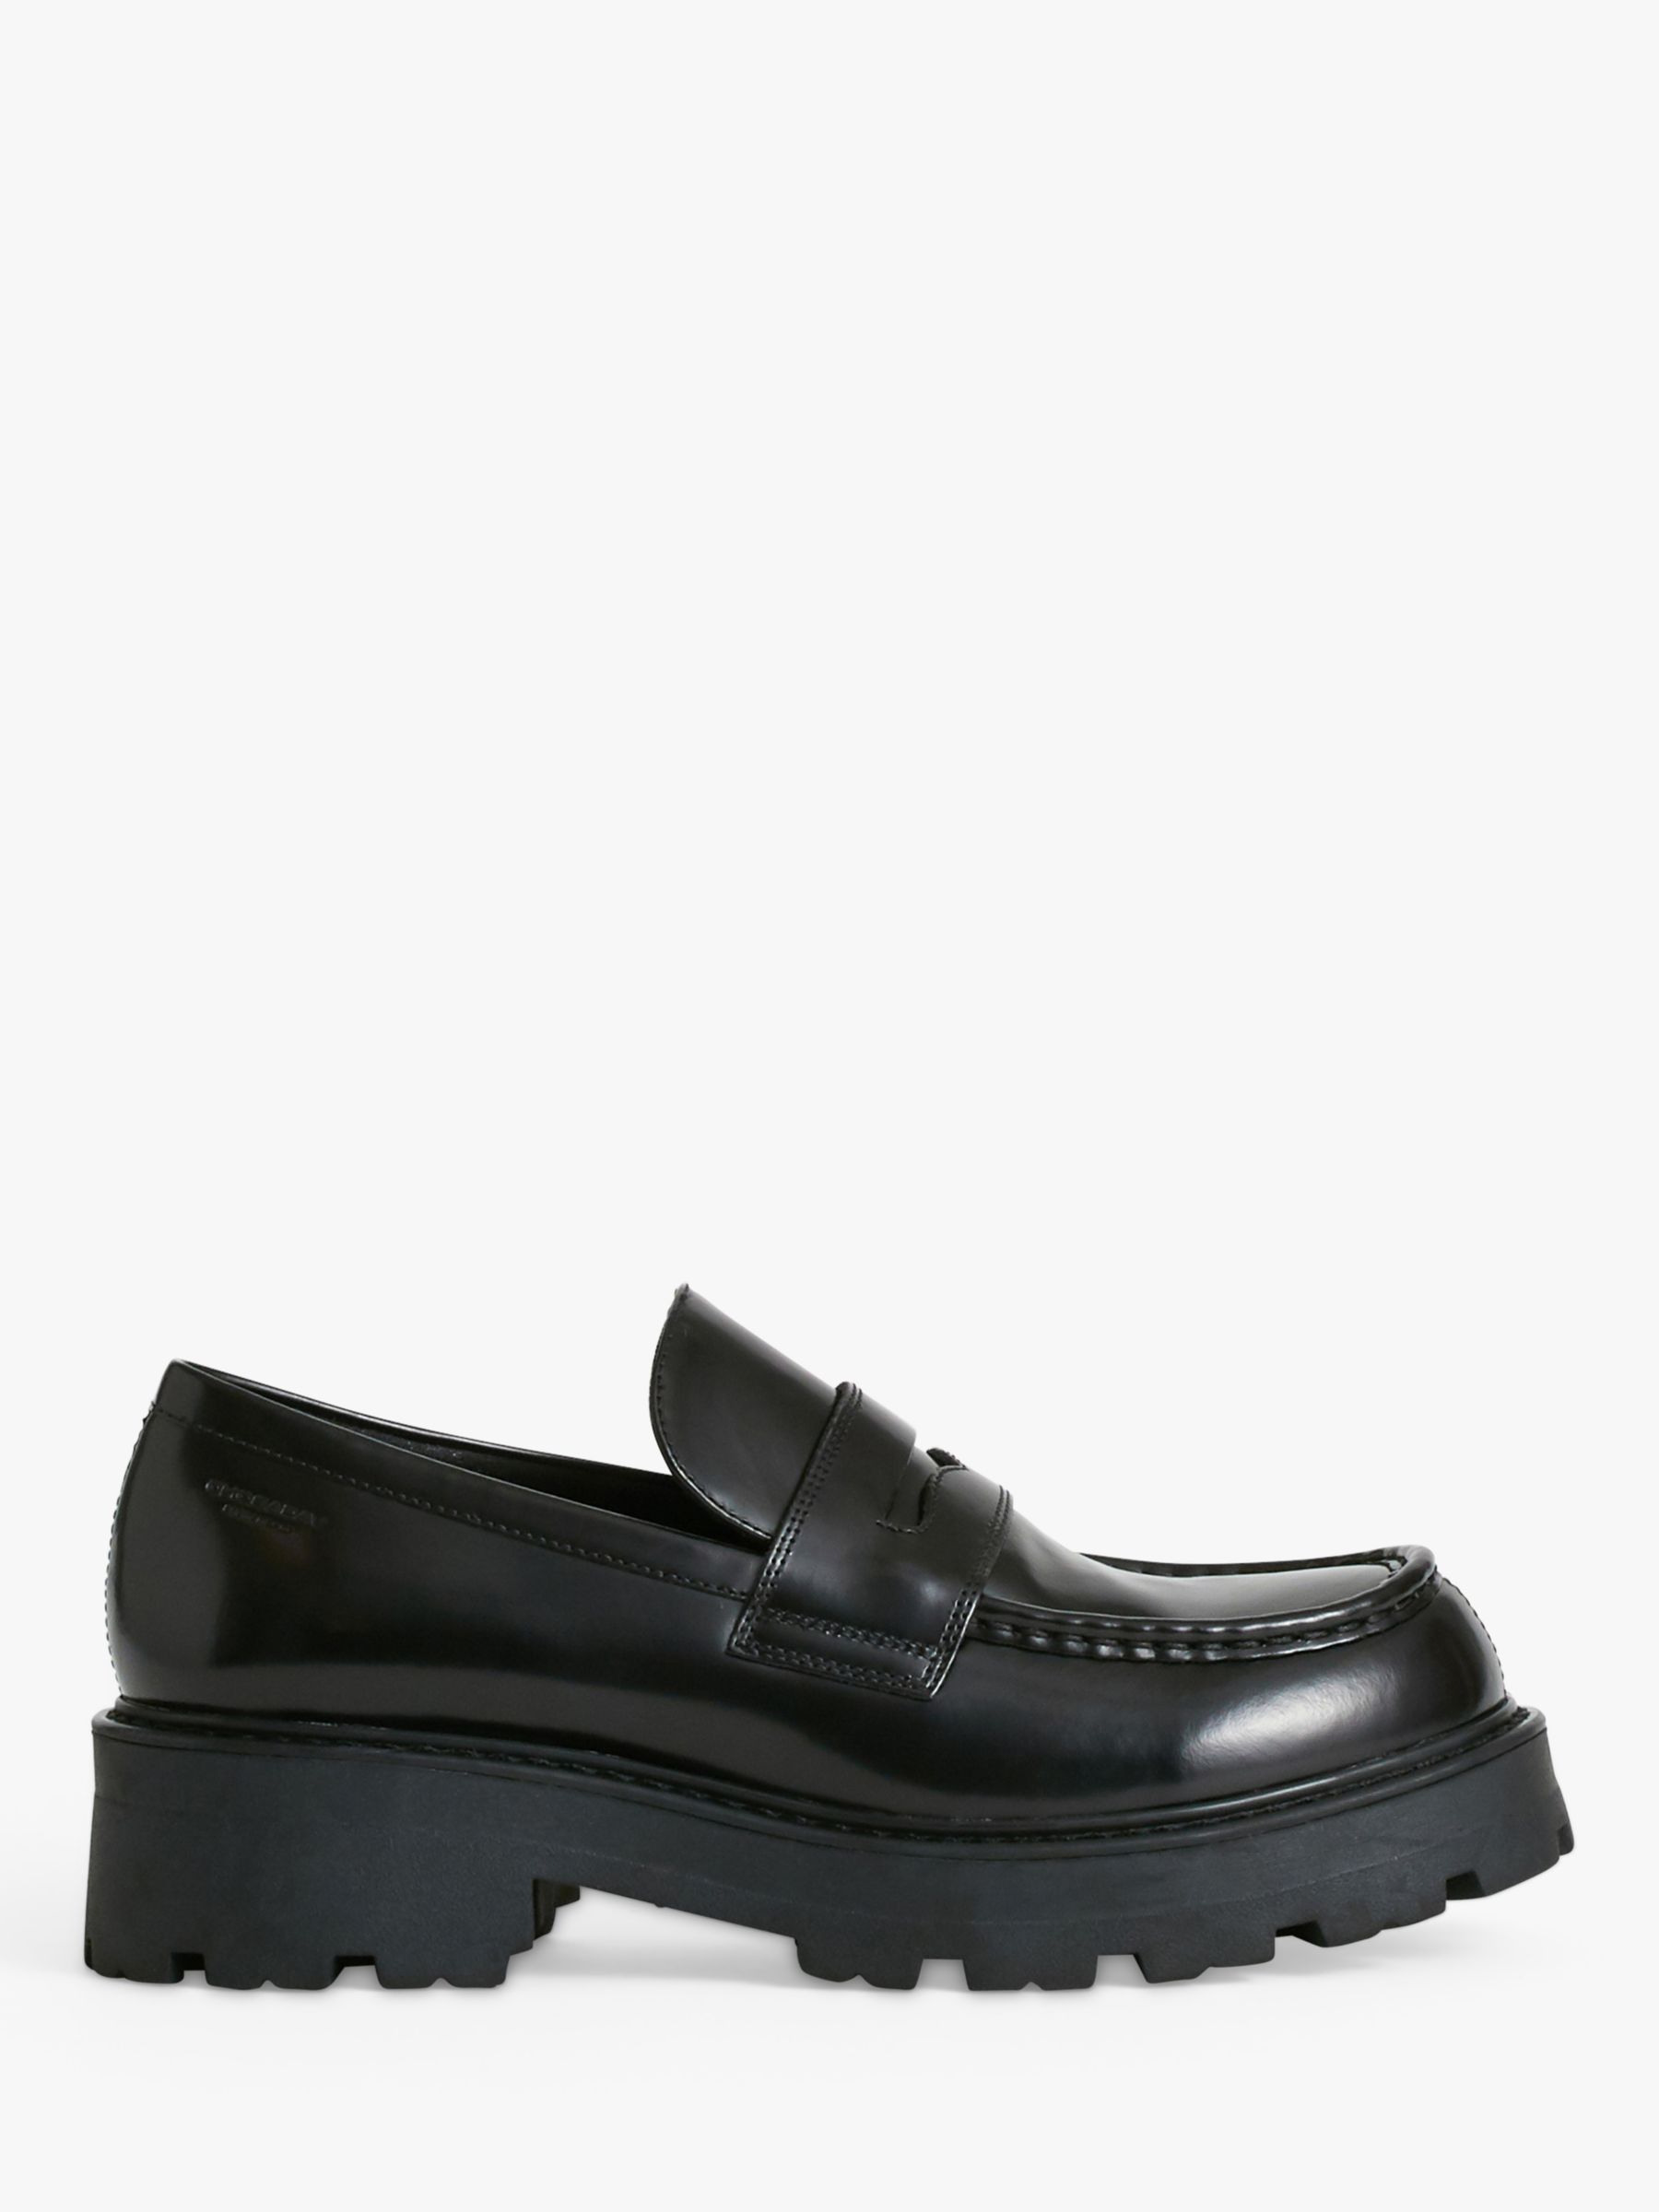 Vagabond Shoemakers Cosmo 2.0 Leather Chunky Loafers, Black at John ...